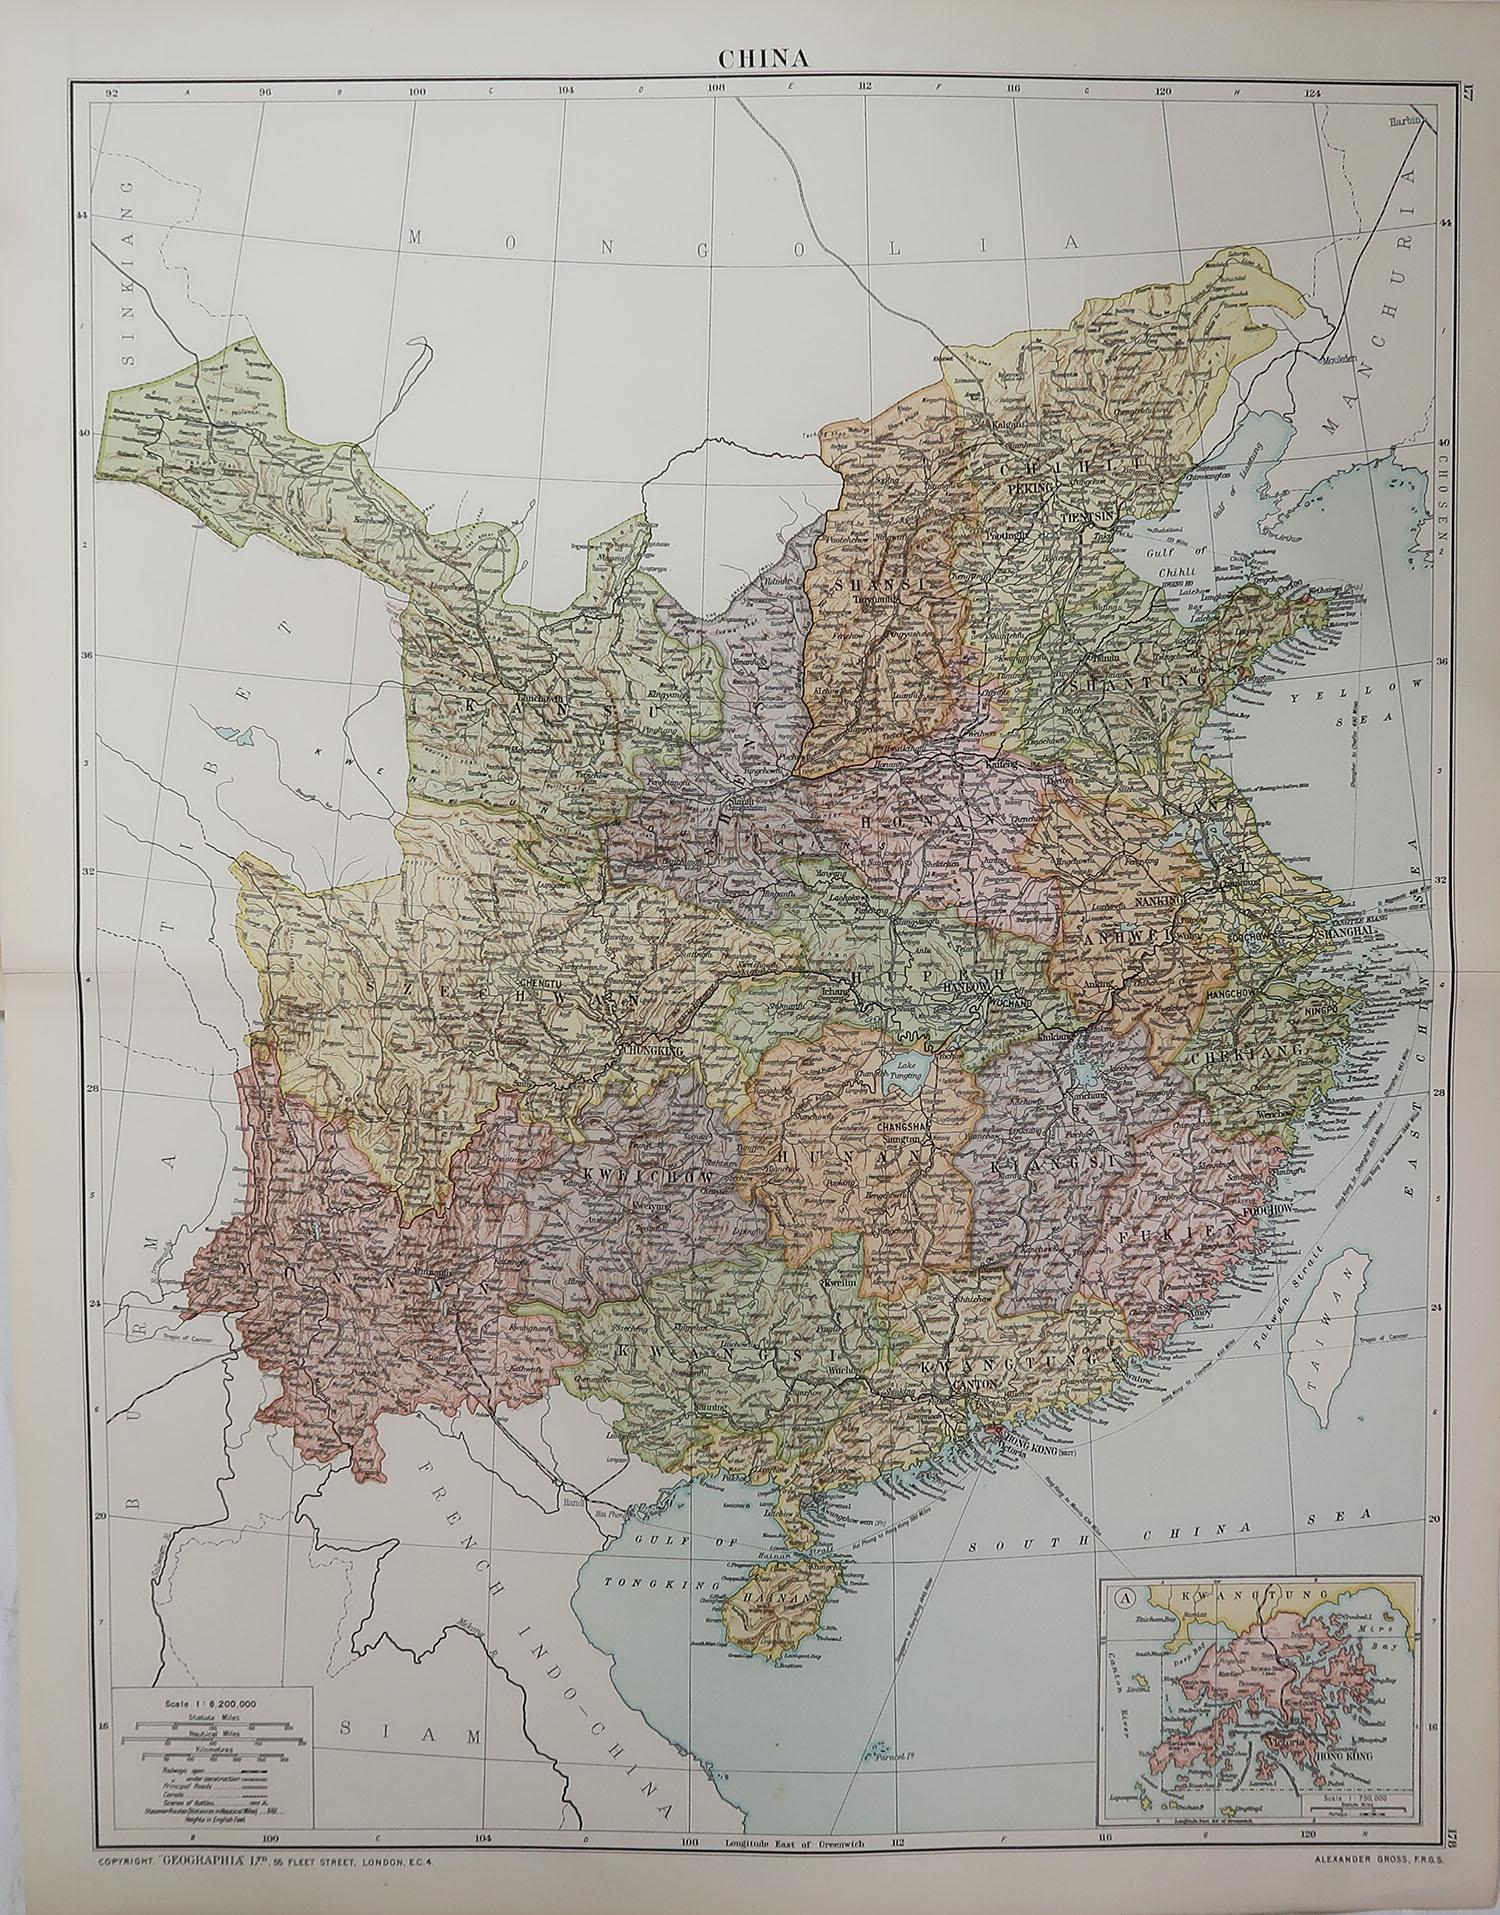 Great map of China

Original color. Good condition

Published by Alexander Gross

Unframed.








 